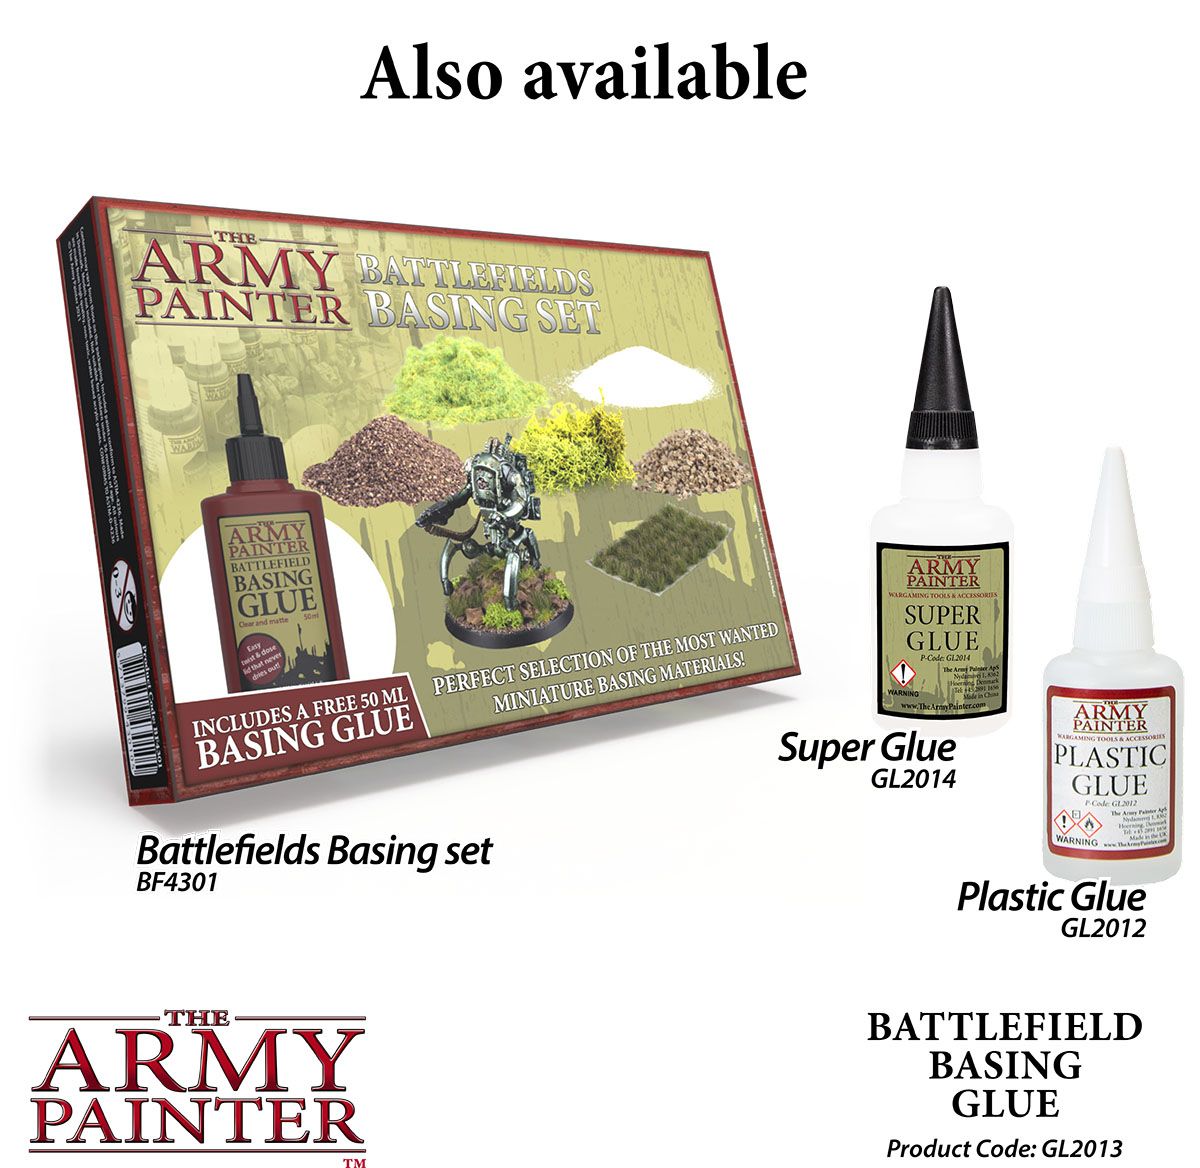 The Army Painter - Battlefield Basing Glue